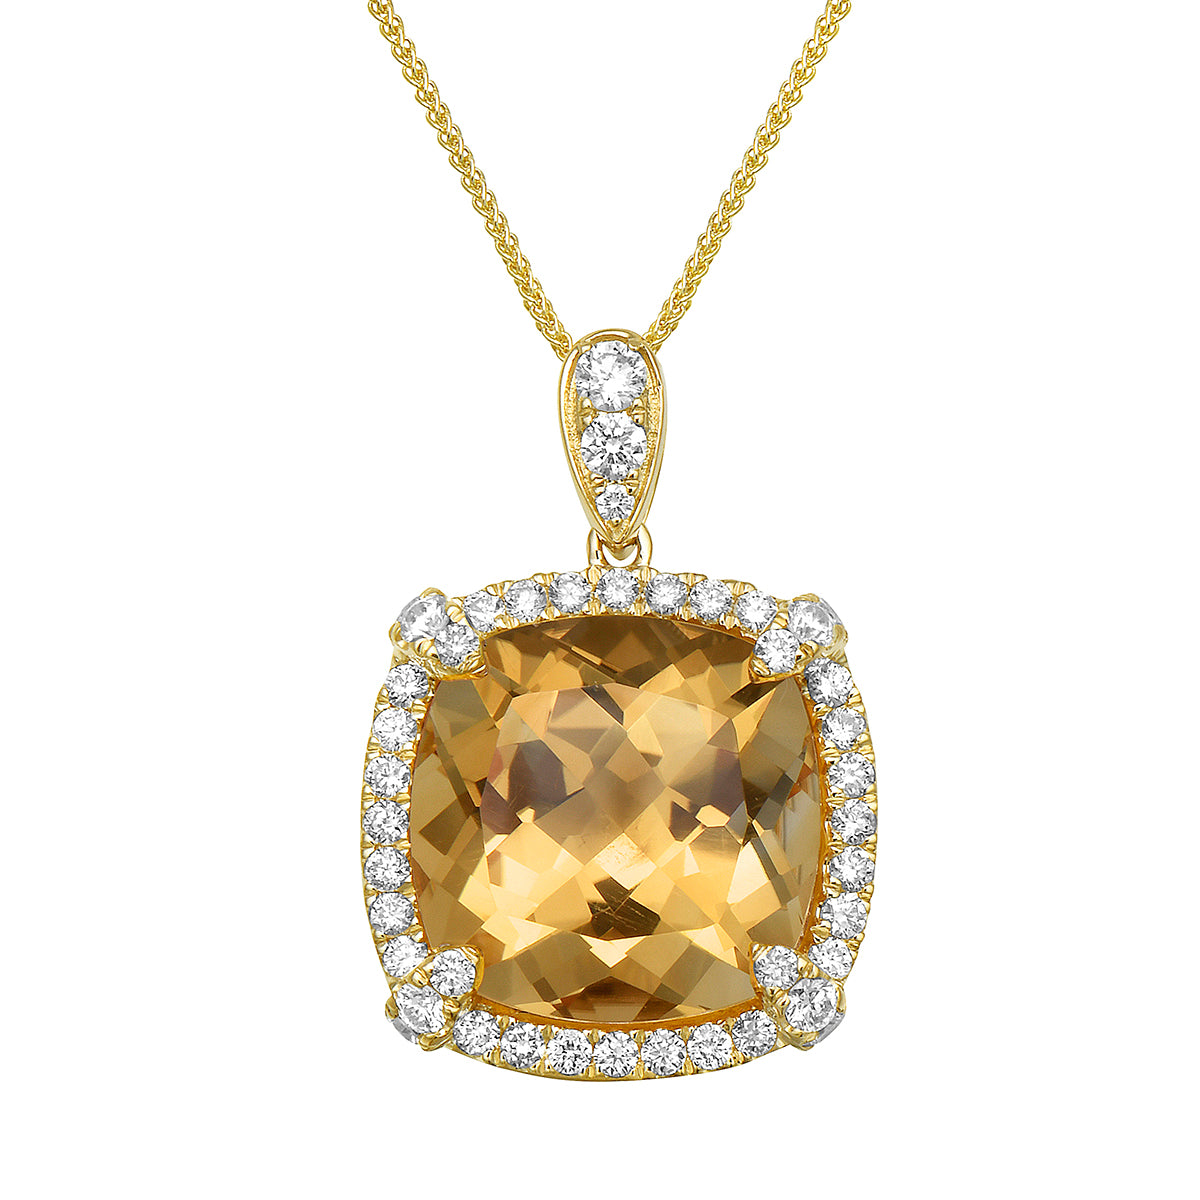 Pendant 14KY/3.2G 1CIT-10.45CT 43RD-0.86CT (14mm) Citrin